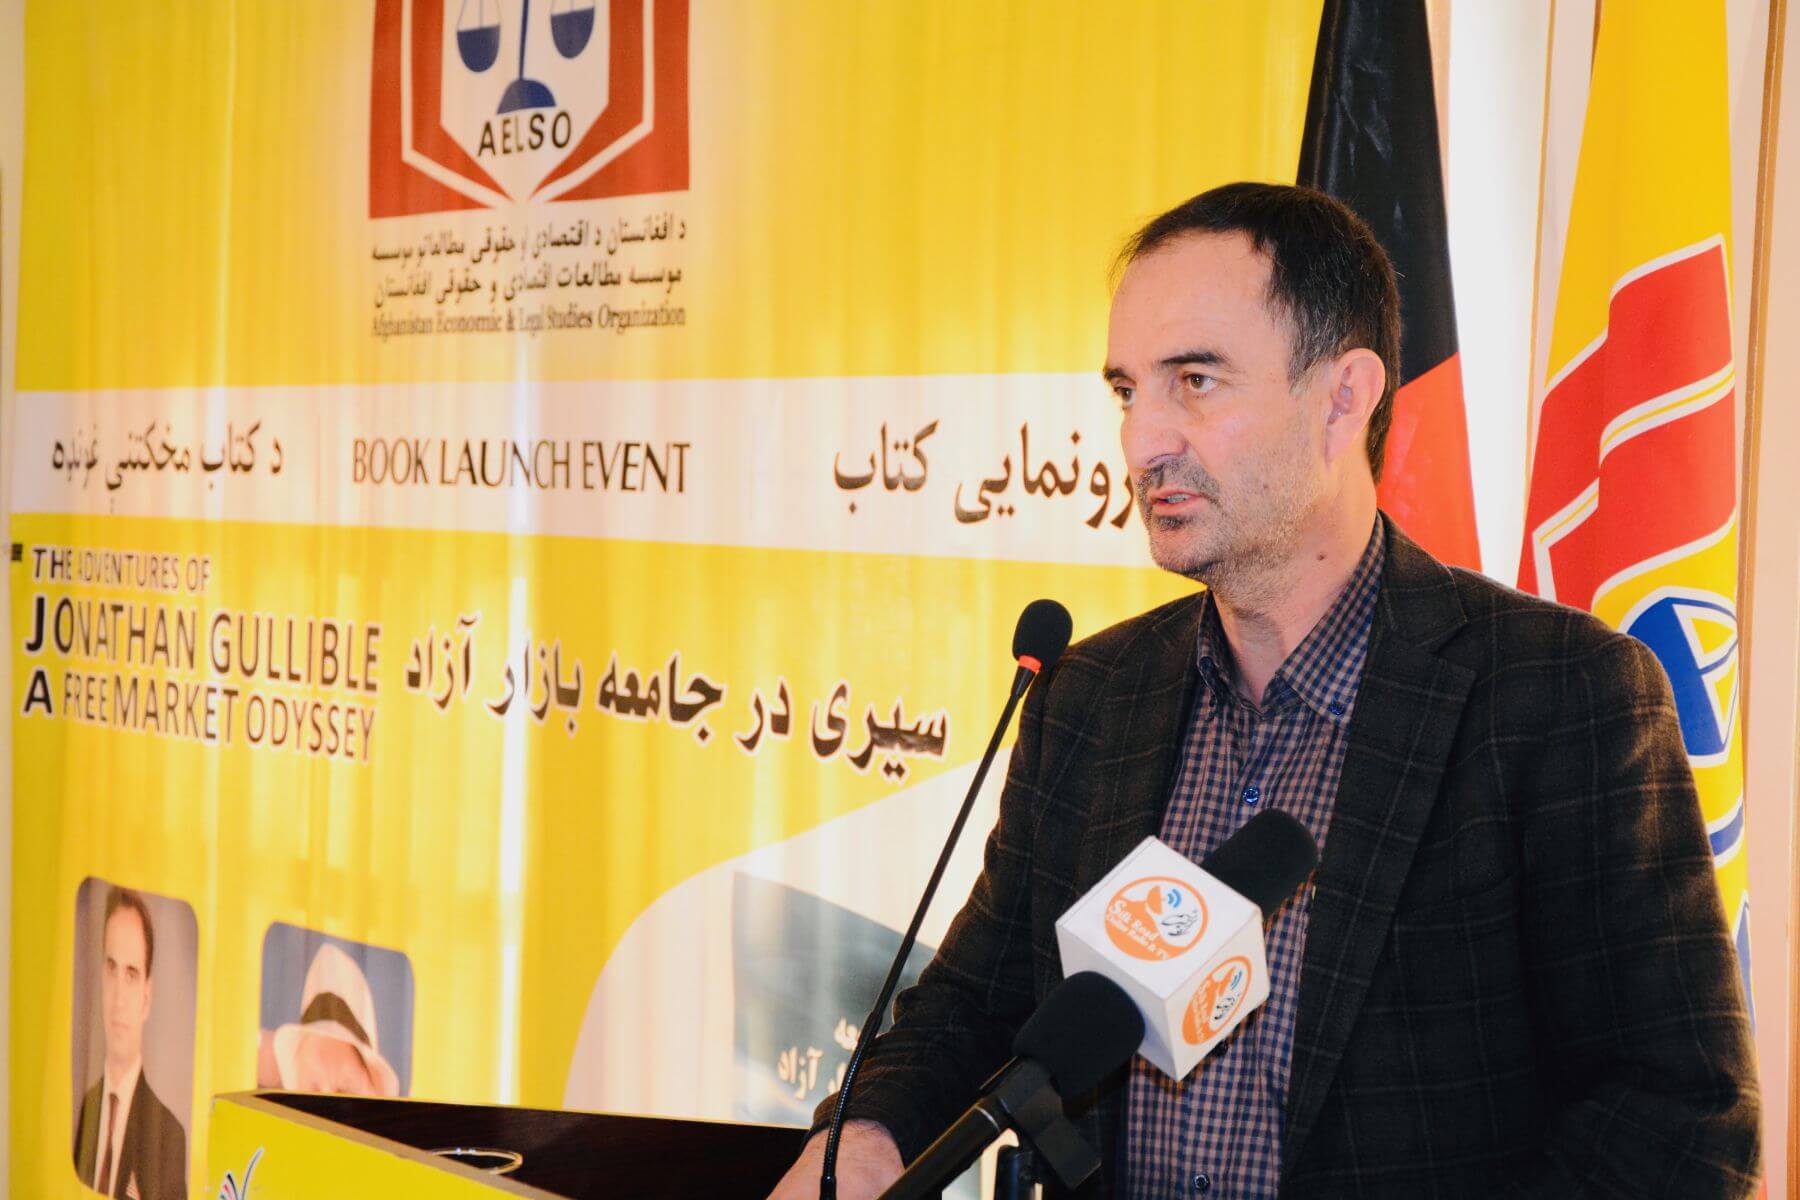 Prof. Khaliluraman Sarwary the General Director of AELSO Academy during his speech